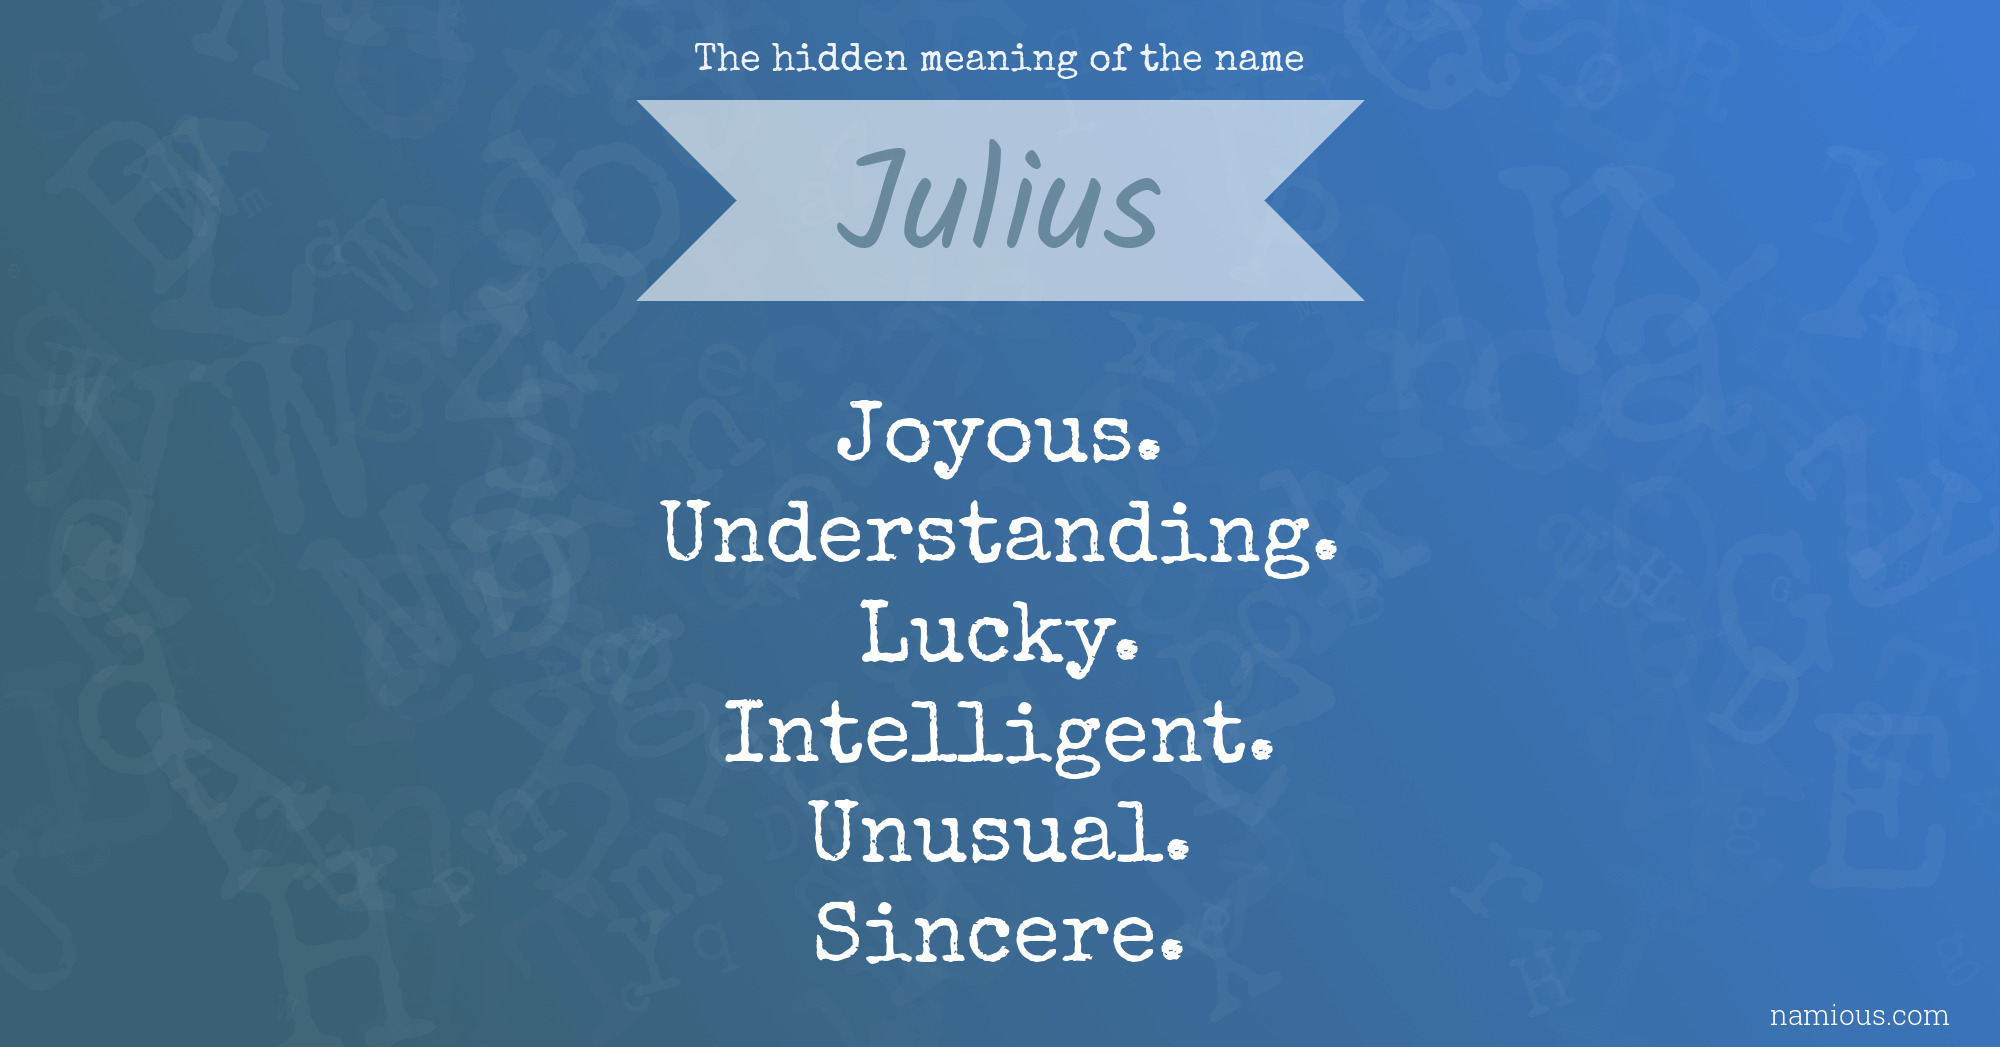 The hidden meaning of the name Julius